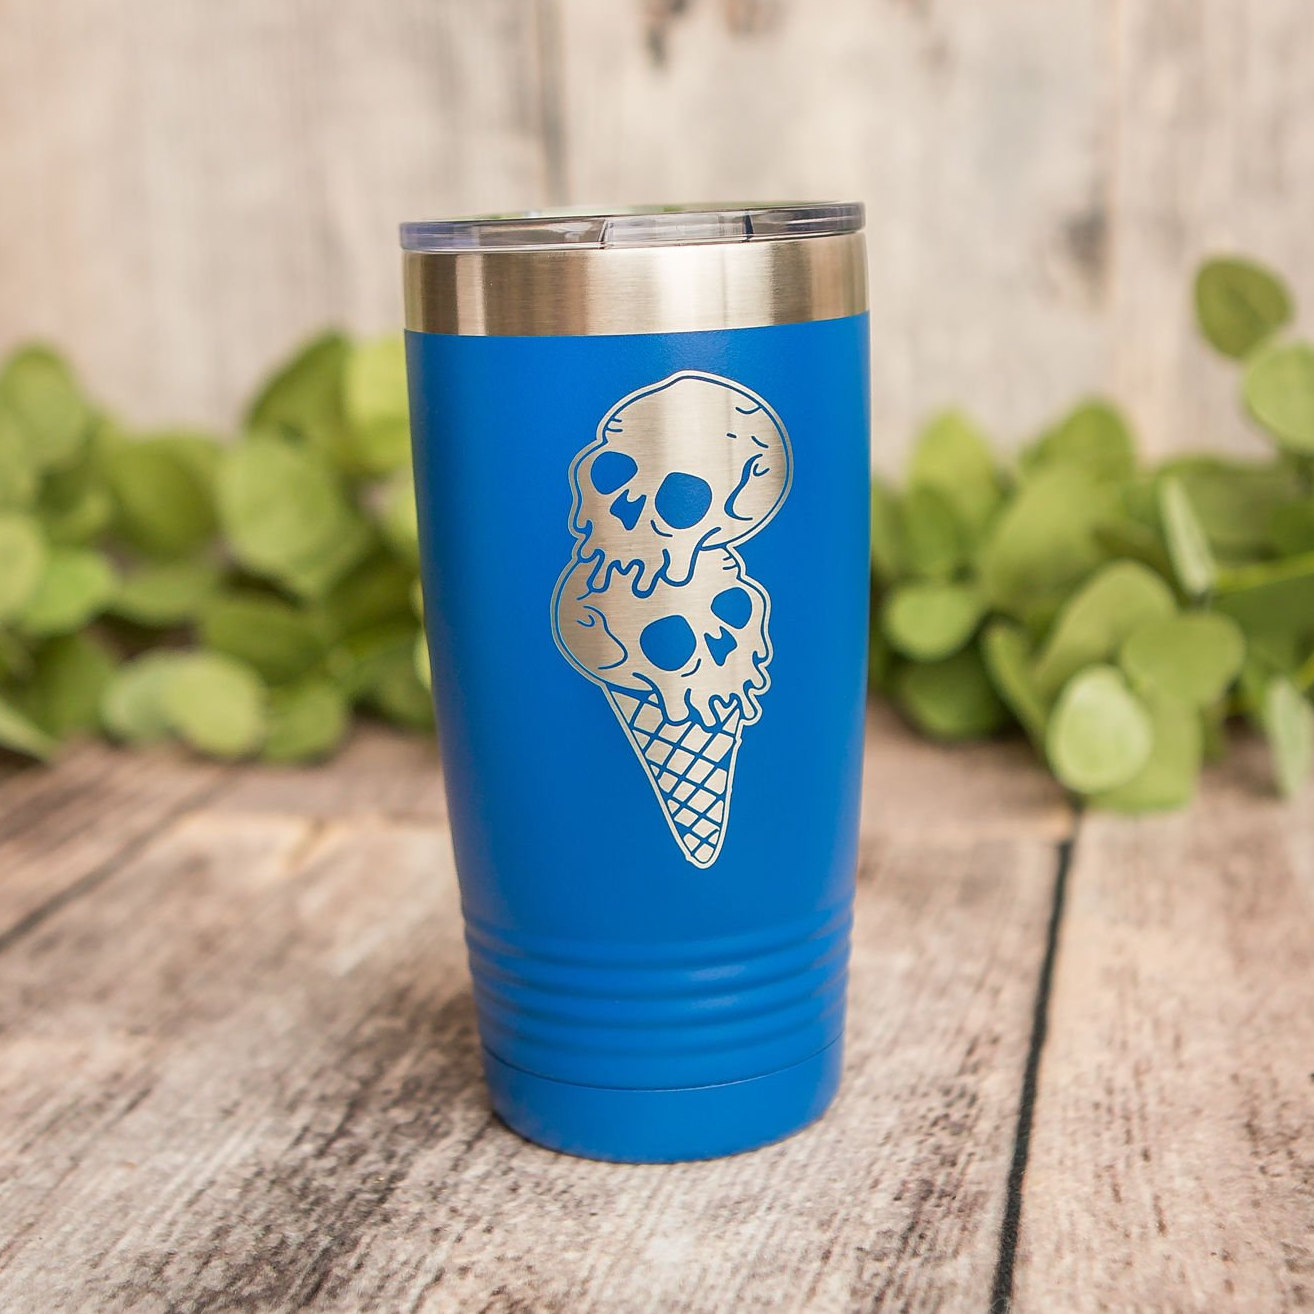 https://3cetching.com/wp-content/uploads/2020/09/skull-ice-cream-engraved-stainless-steel-tumbler-funny-adult-gift-skull-decor-5f5fc7f4.jpg